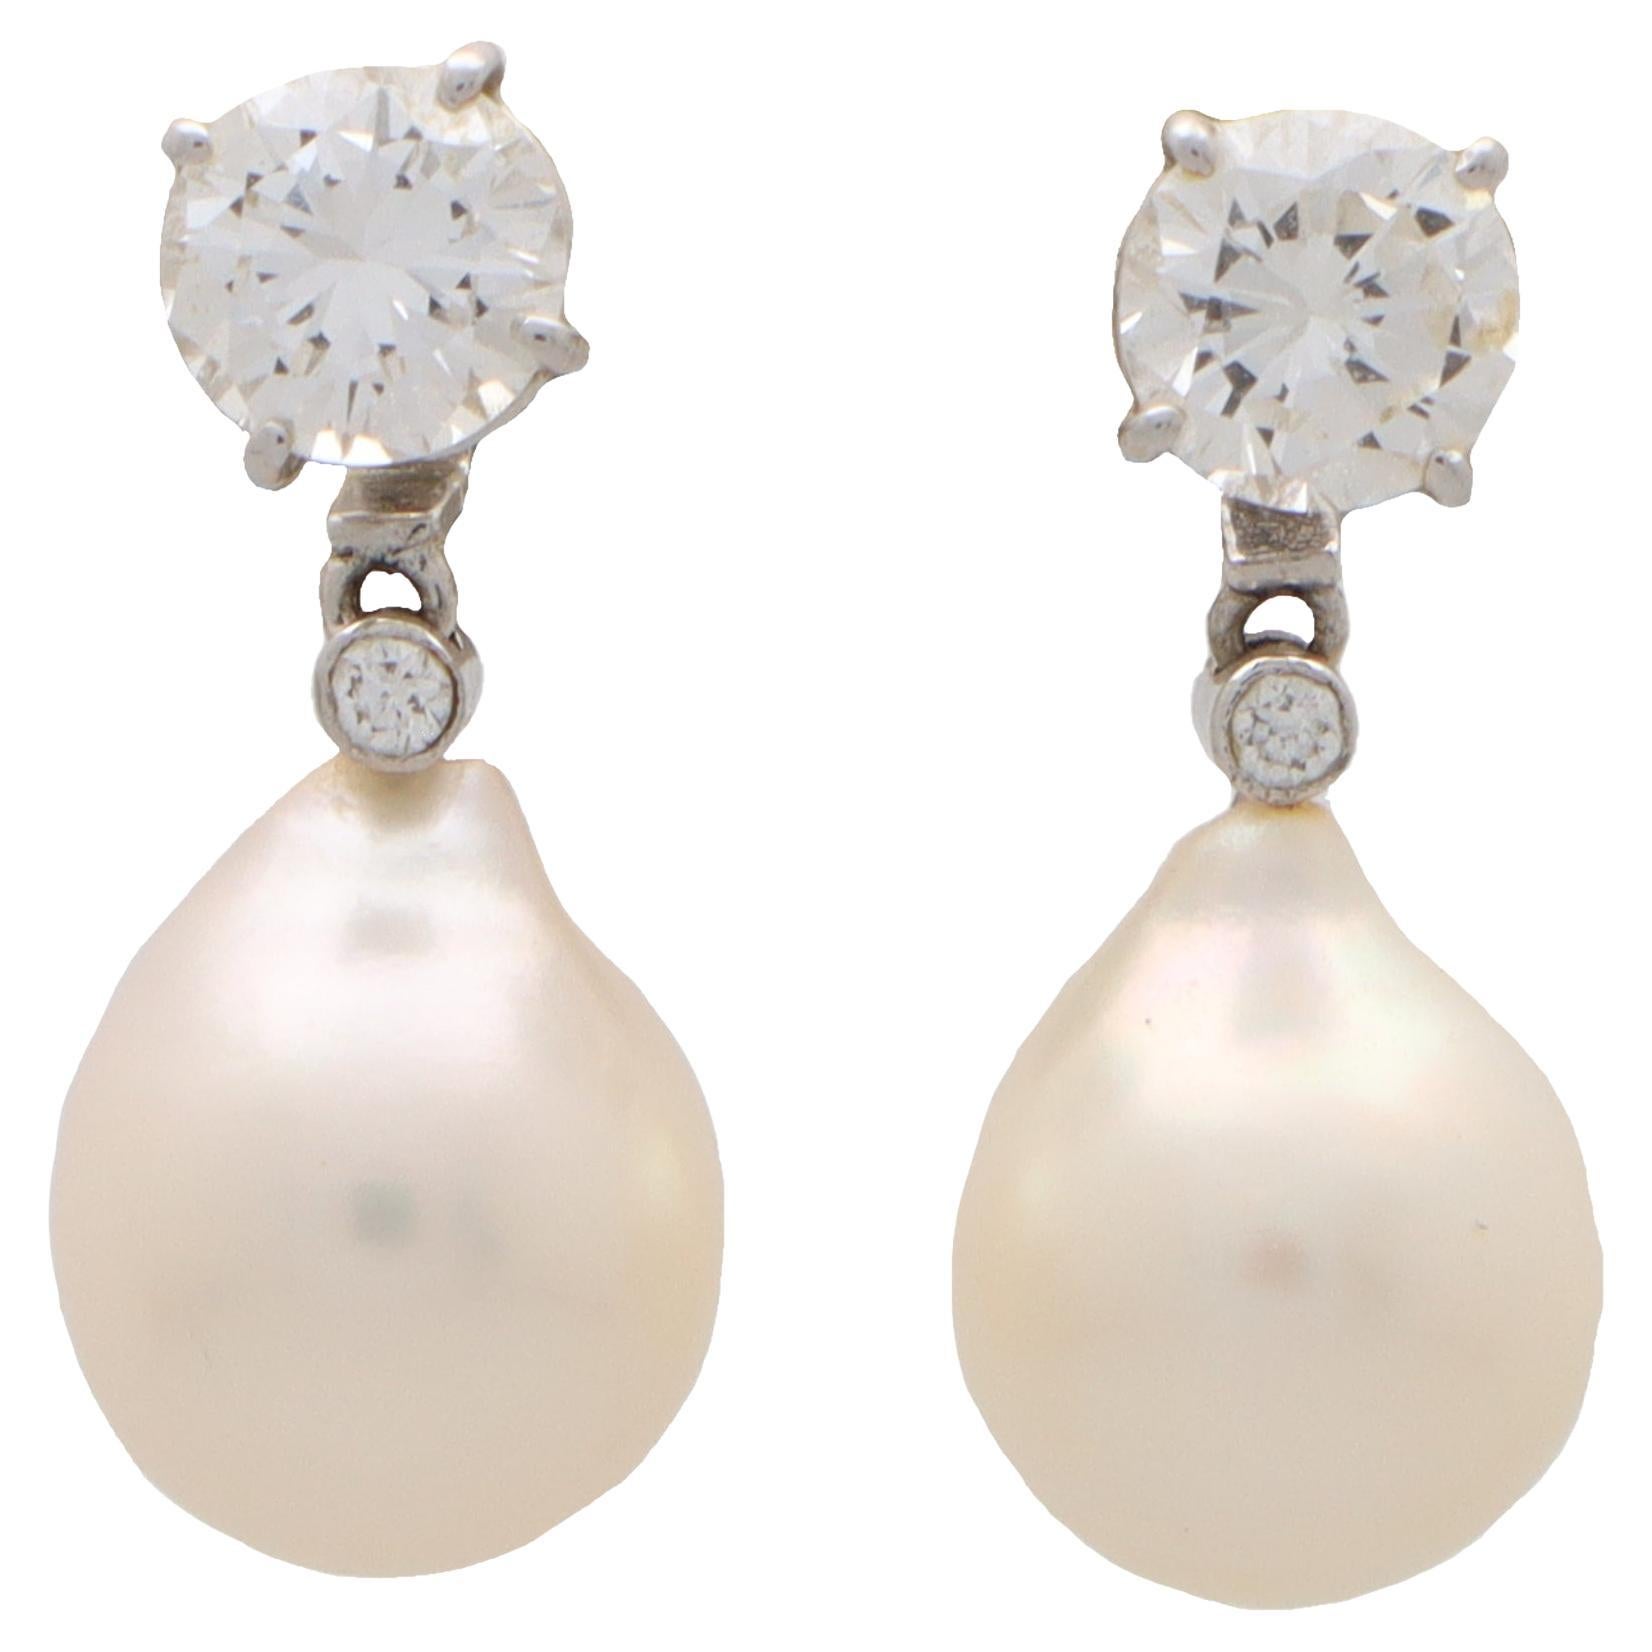 Convertible Solitaire Diamond Stud and Pearl Drop Earrings in 18k White Gold